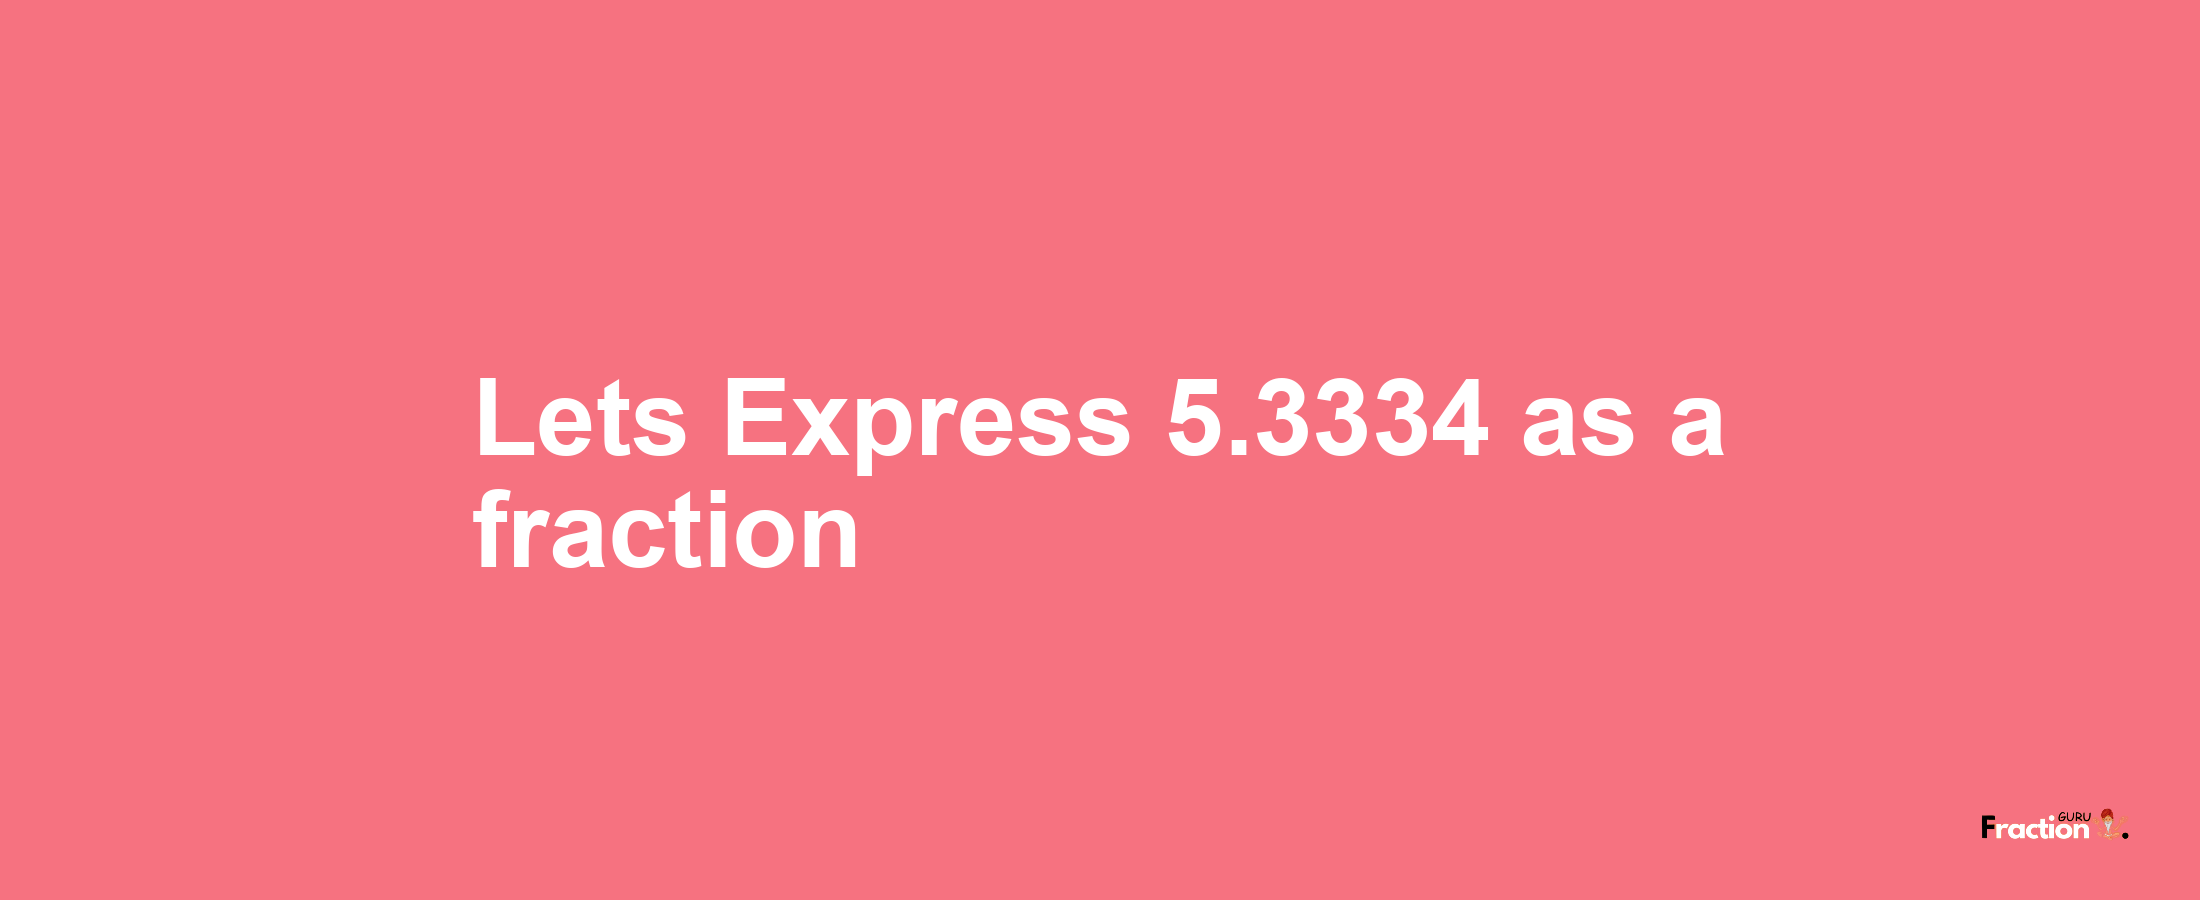 Lets Express 5.3334 as afraction